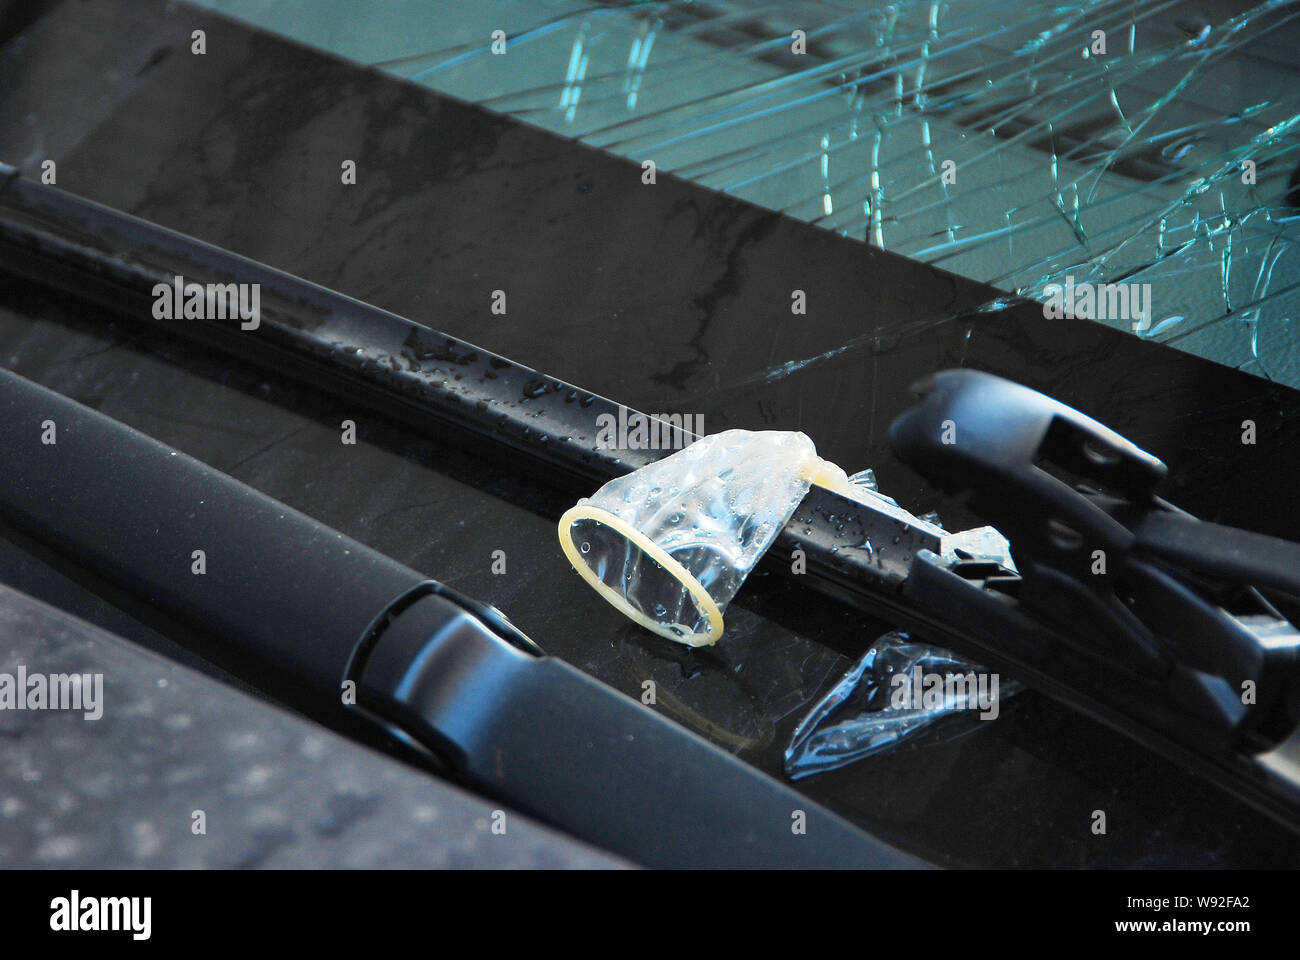 A used condom is seen on the shattered front windshield of a Chevrolet Cruze after it fell from an unknown floor of a high-rise residential apartment Stock Photo